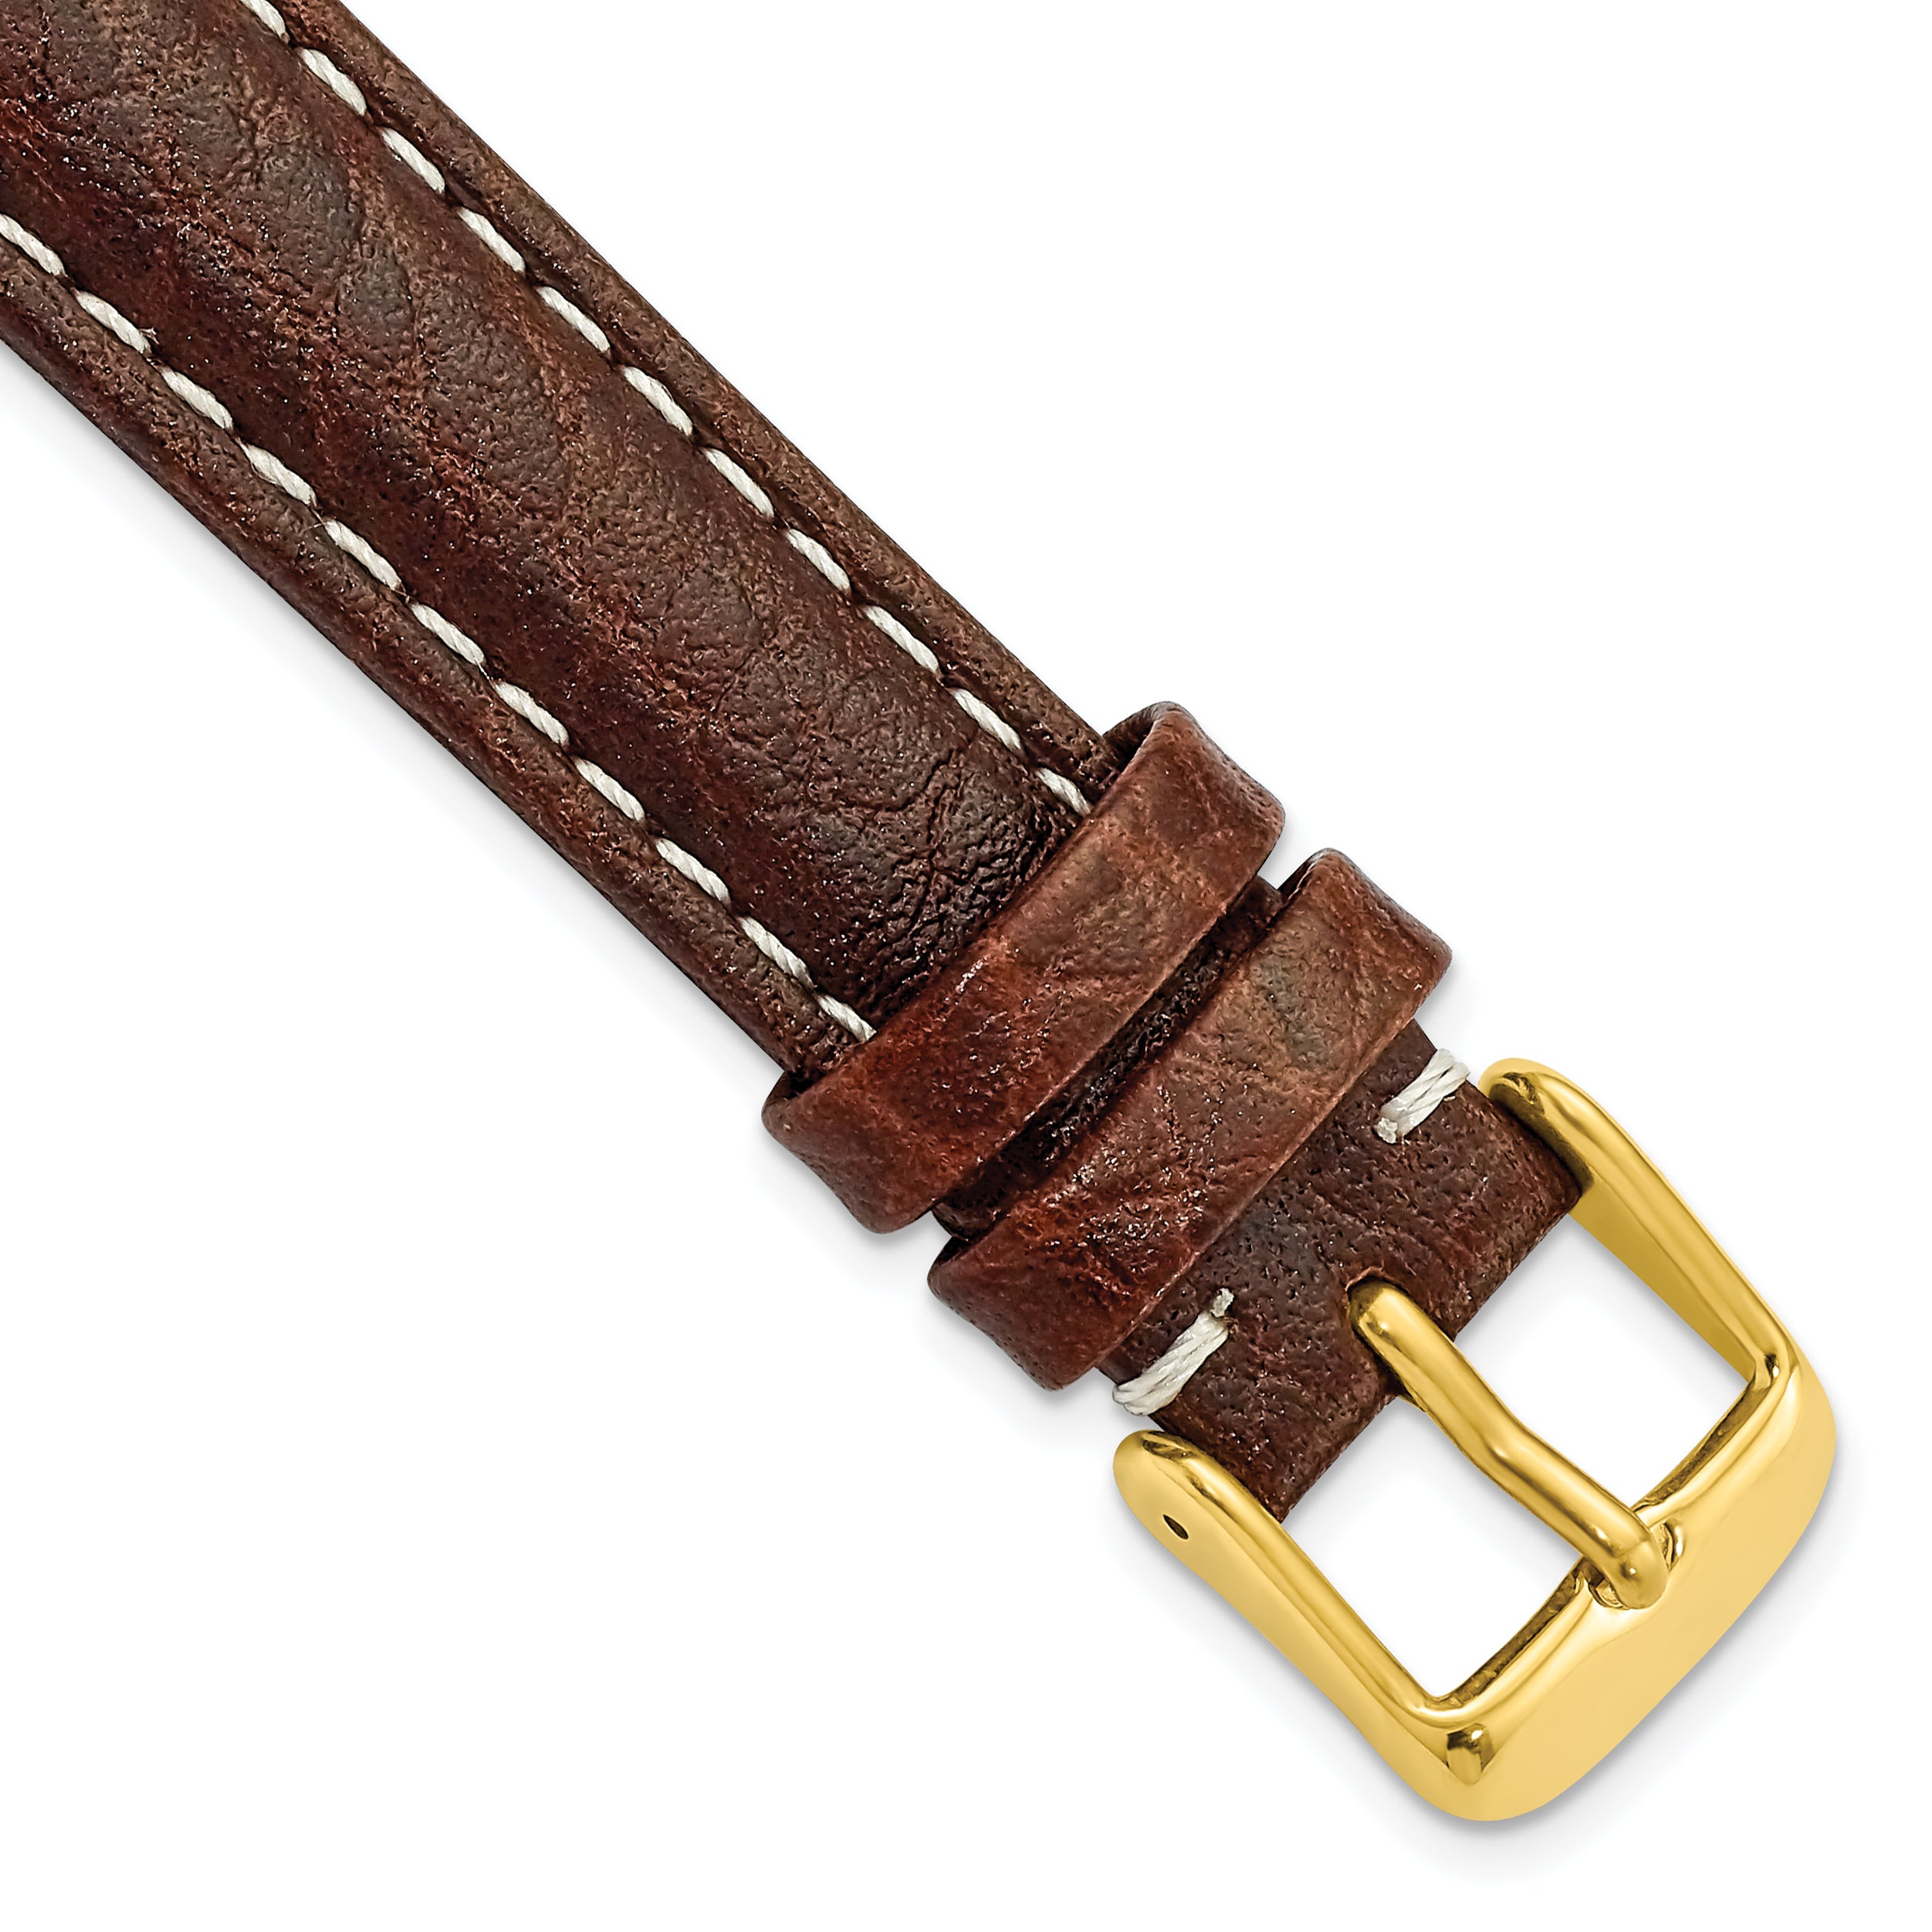 DeBeer 16mm Dark Brown Sport Leather with White Stitching and Gold-tone Buckle 7.5 inch Watch Band